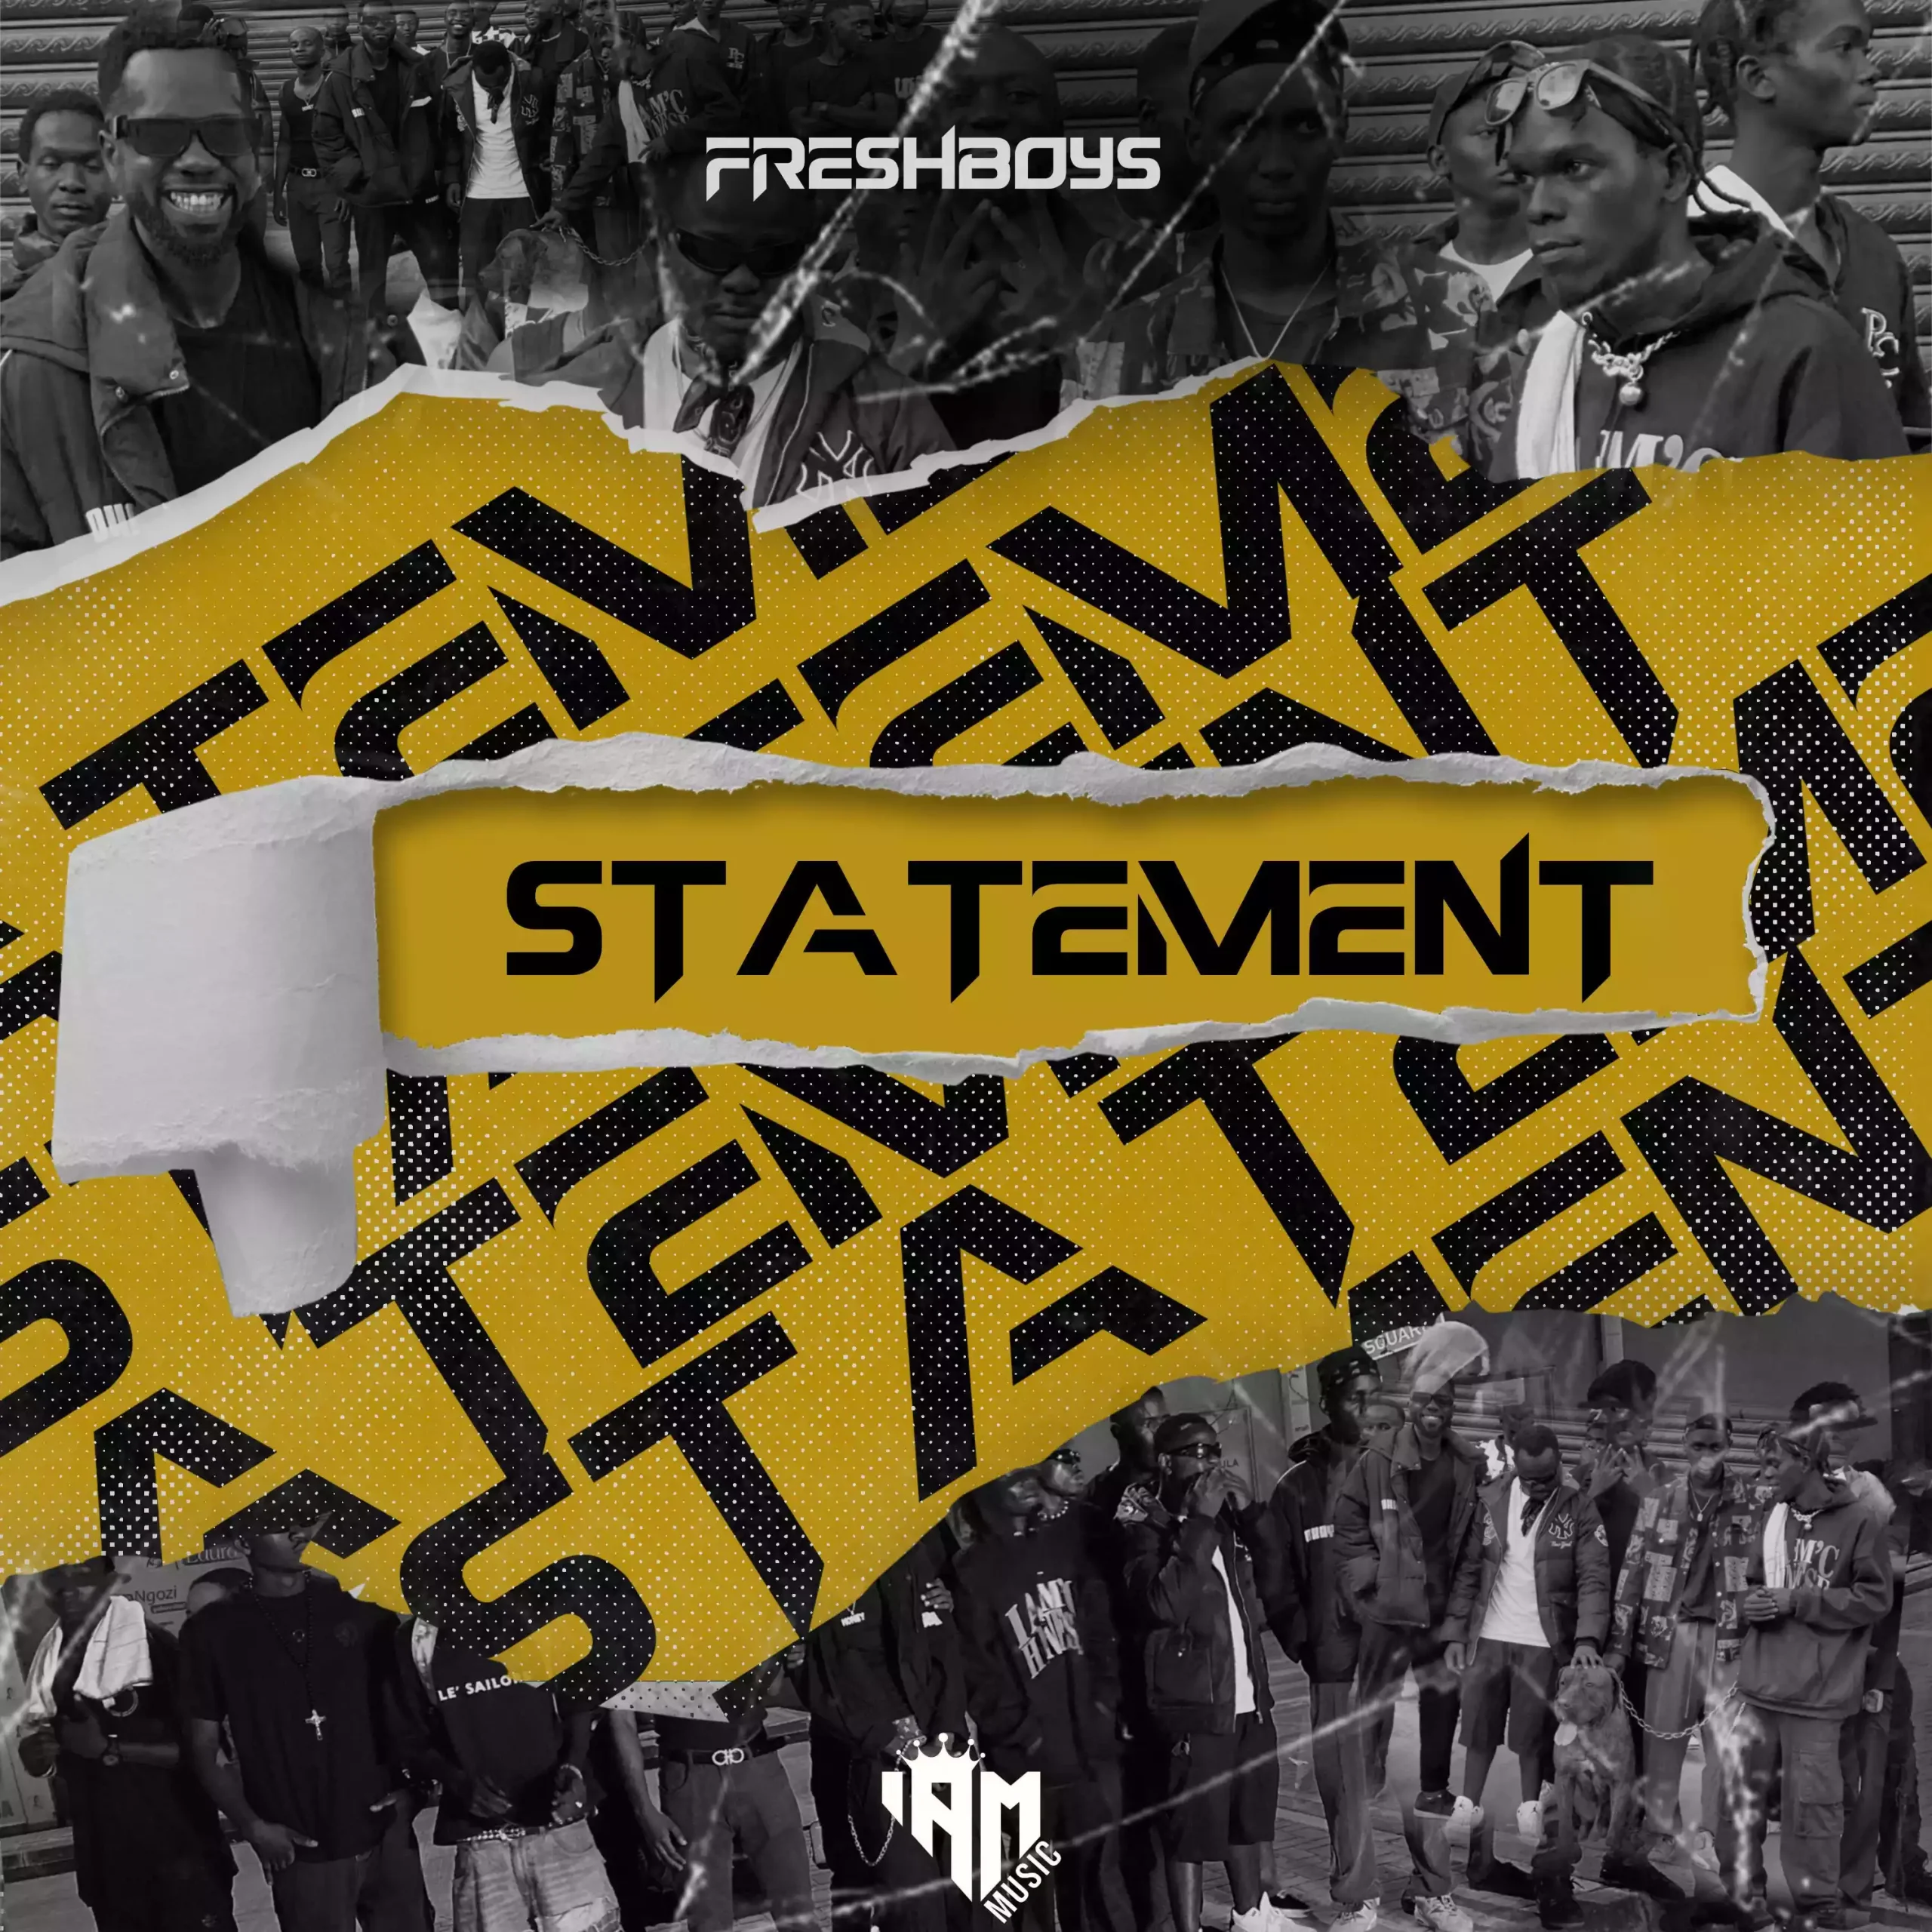 FreshBoys Statement Mp3 Download scaled